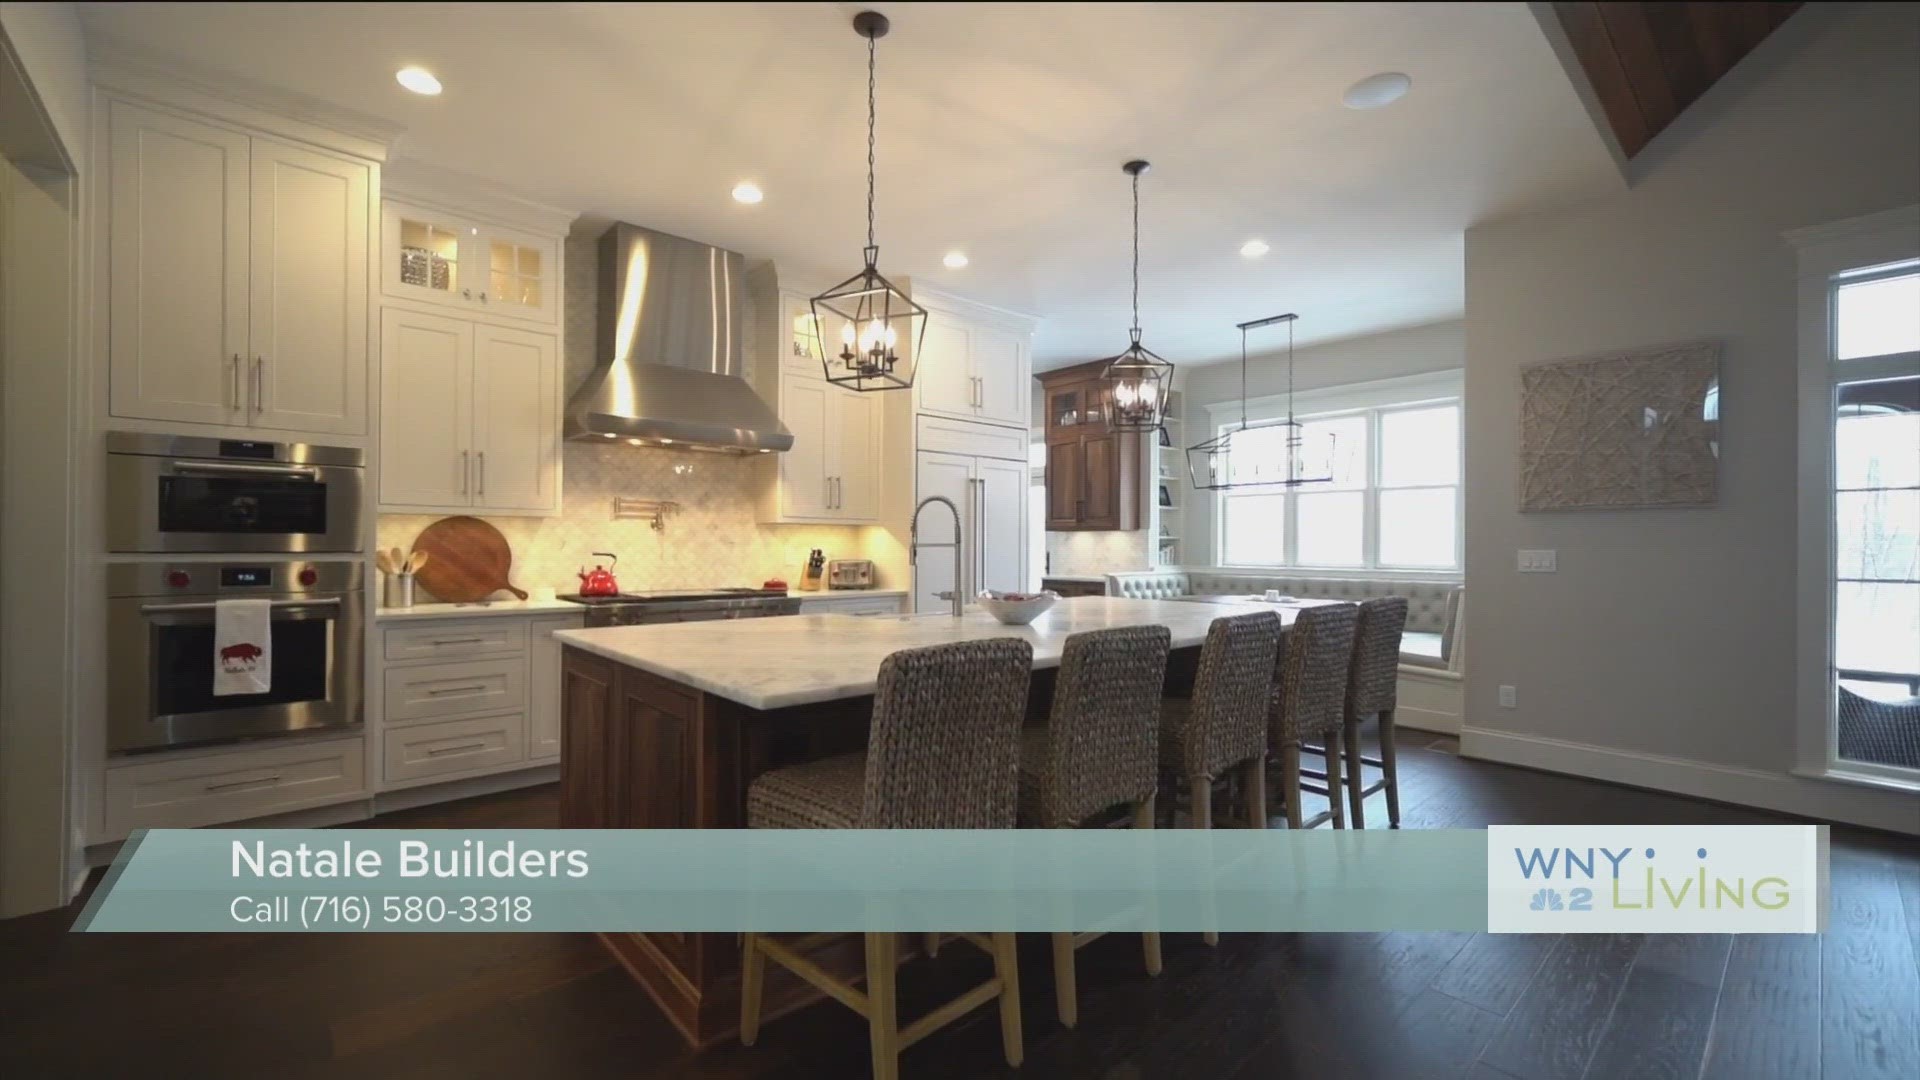 Sat. March 9th - Natale Builders (THIS VIDEO IS SPONSORED BY NATALE BUILDERS)